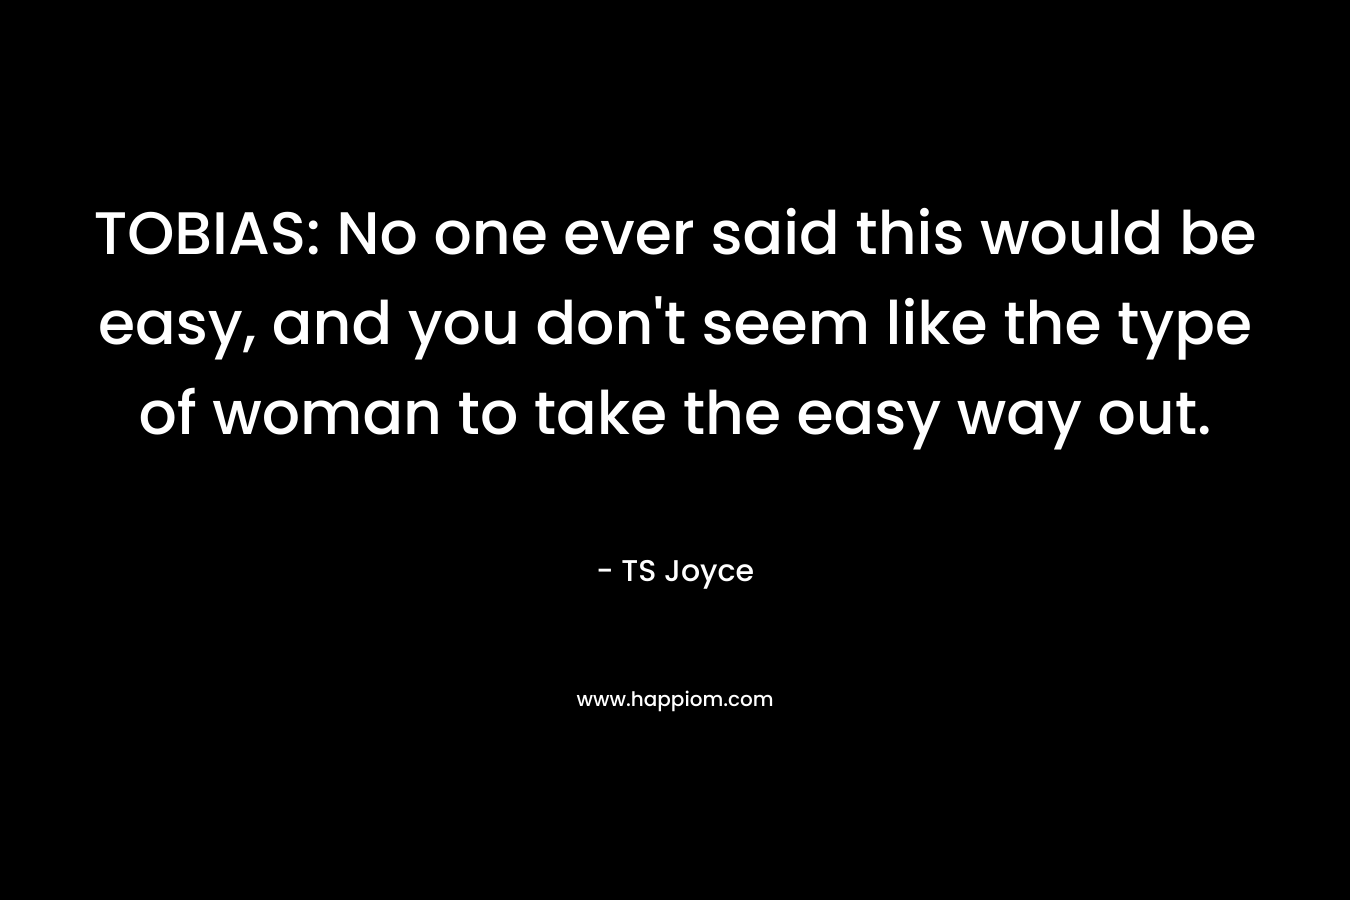 TOBIAS: No one ever said this would be easy, and you don’t seem like the type of woman to take the easy way out. – TS Joyce